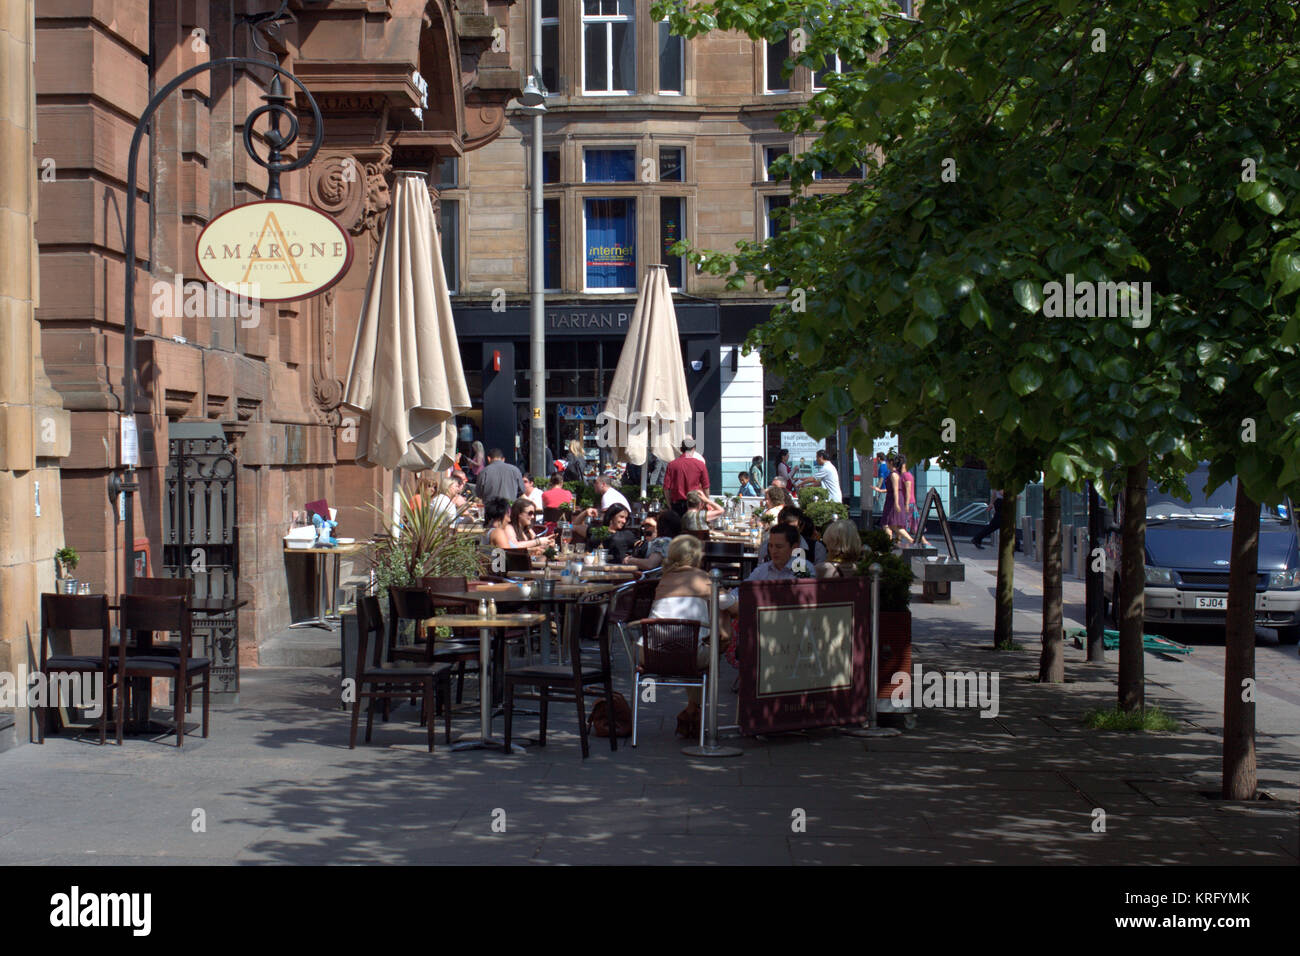 cafe amarone tables outside customers diners patrons sunny everyday British street scene Glasgow Nelson Mandela Place, just off Buchanan Street Stock Photo